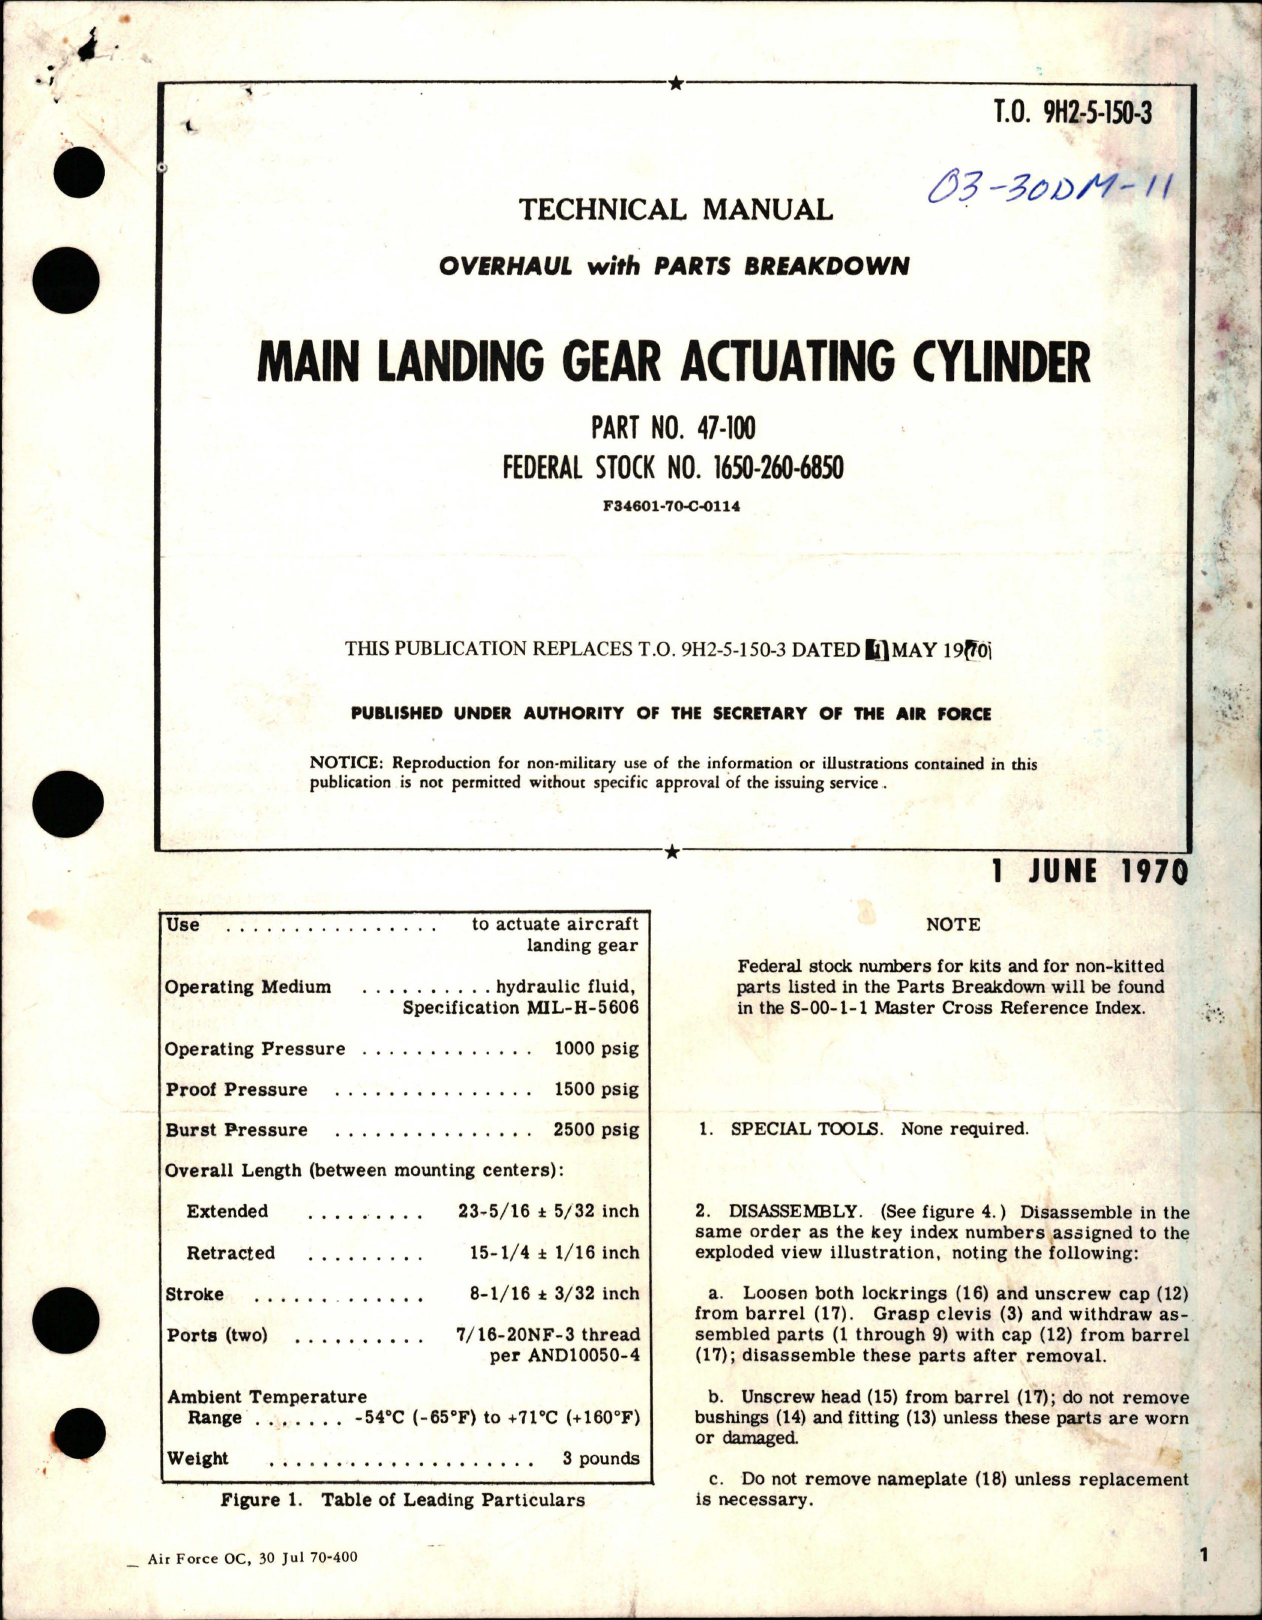 Sample page 1 from AirCorps Library document: Overhaul with Parts Breakdown for Main Landing Gear Actuating Cylinder - Part 47-100